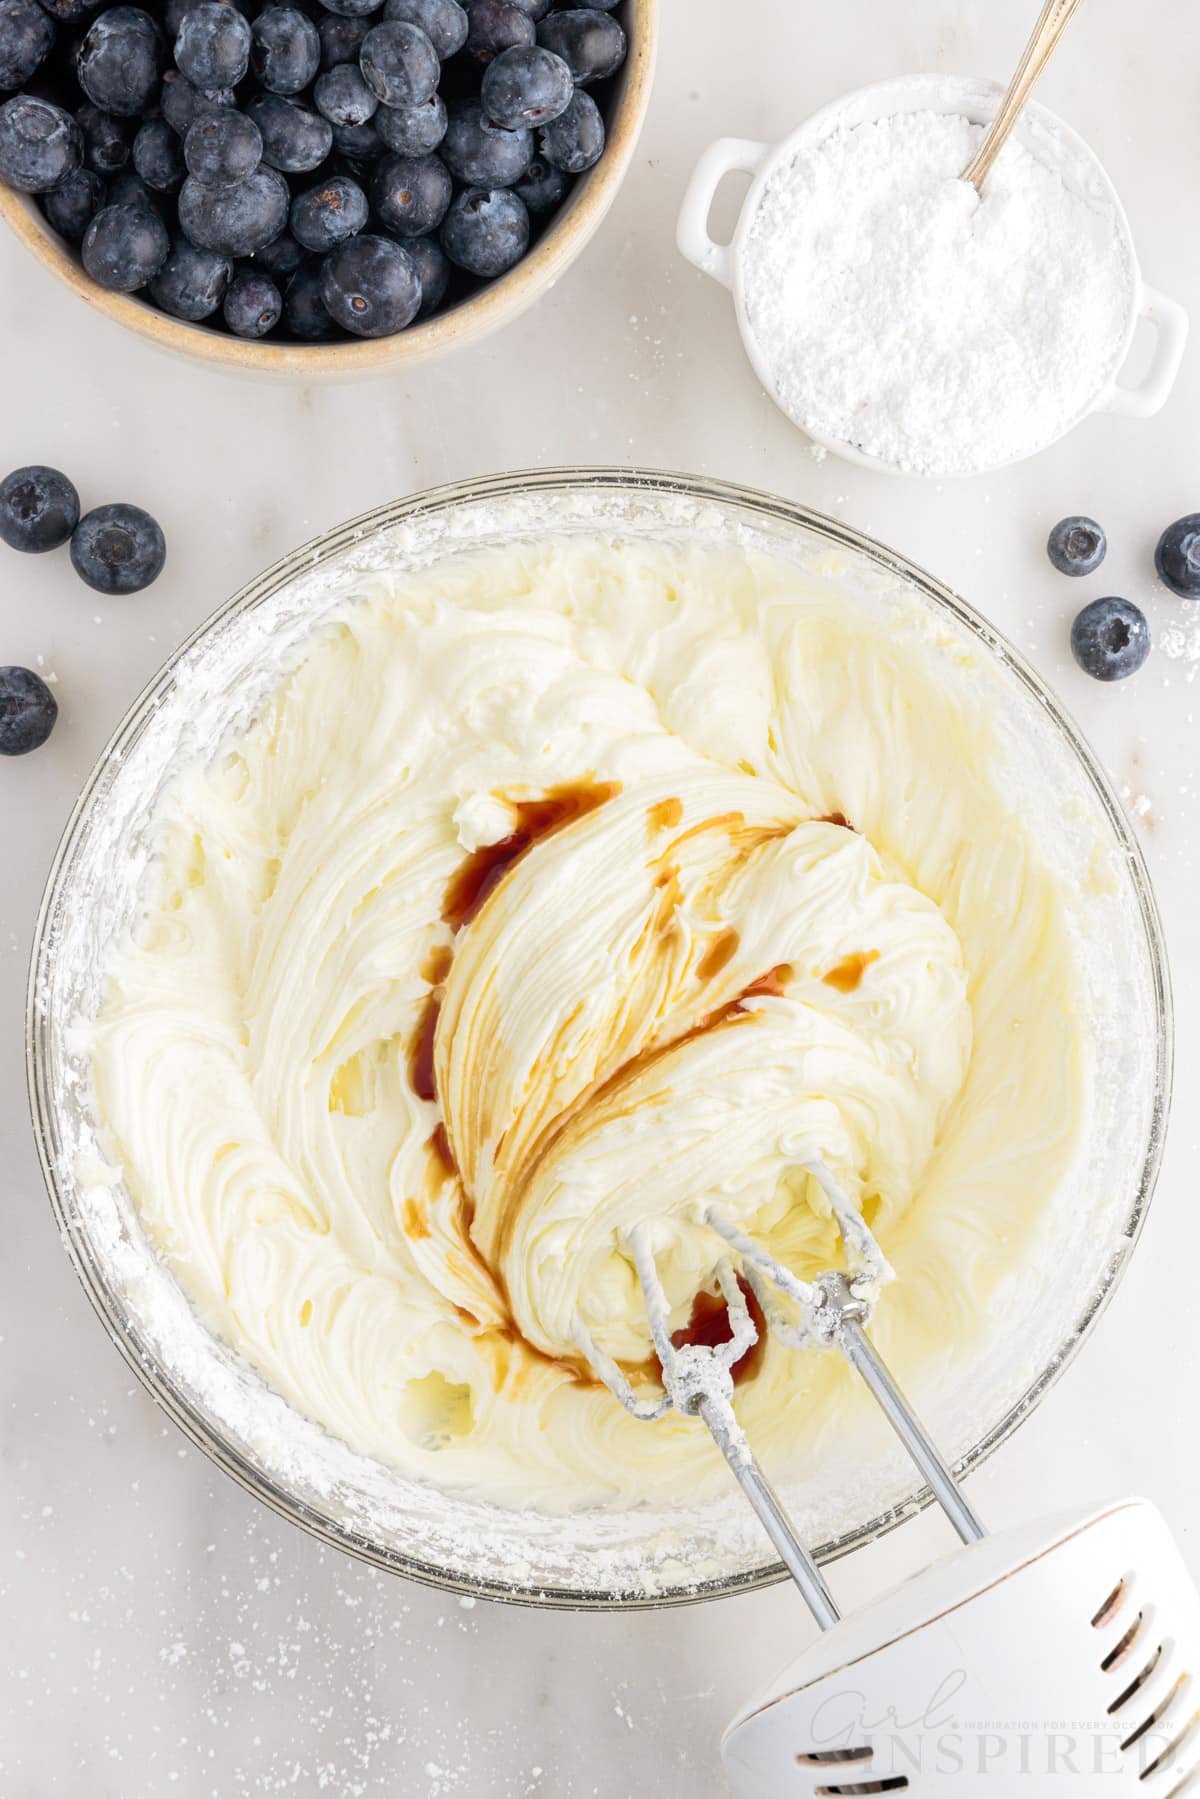 Vanilla added to frosting mixture with a hand mixer inserted next to blueberries in a bowl and a small dish of powdered sugar.